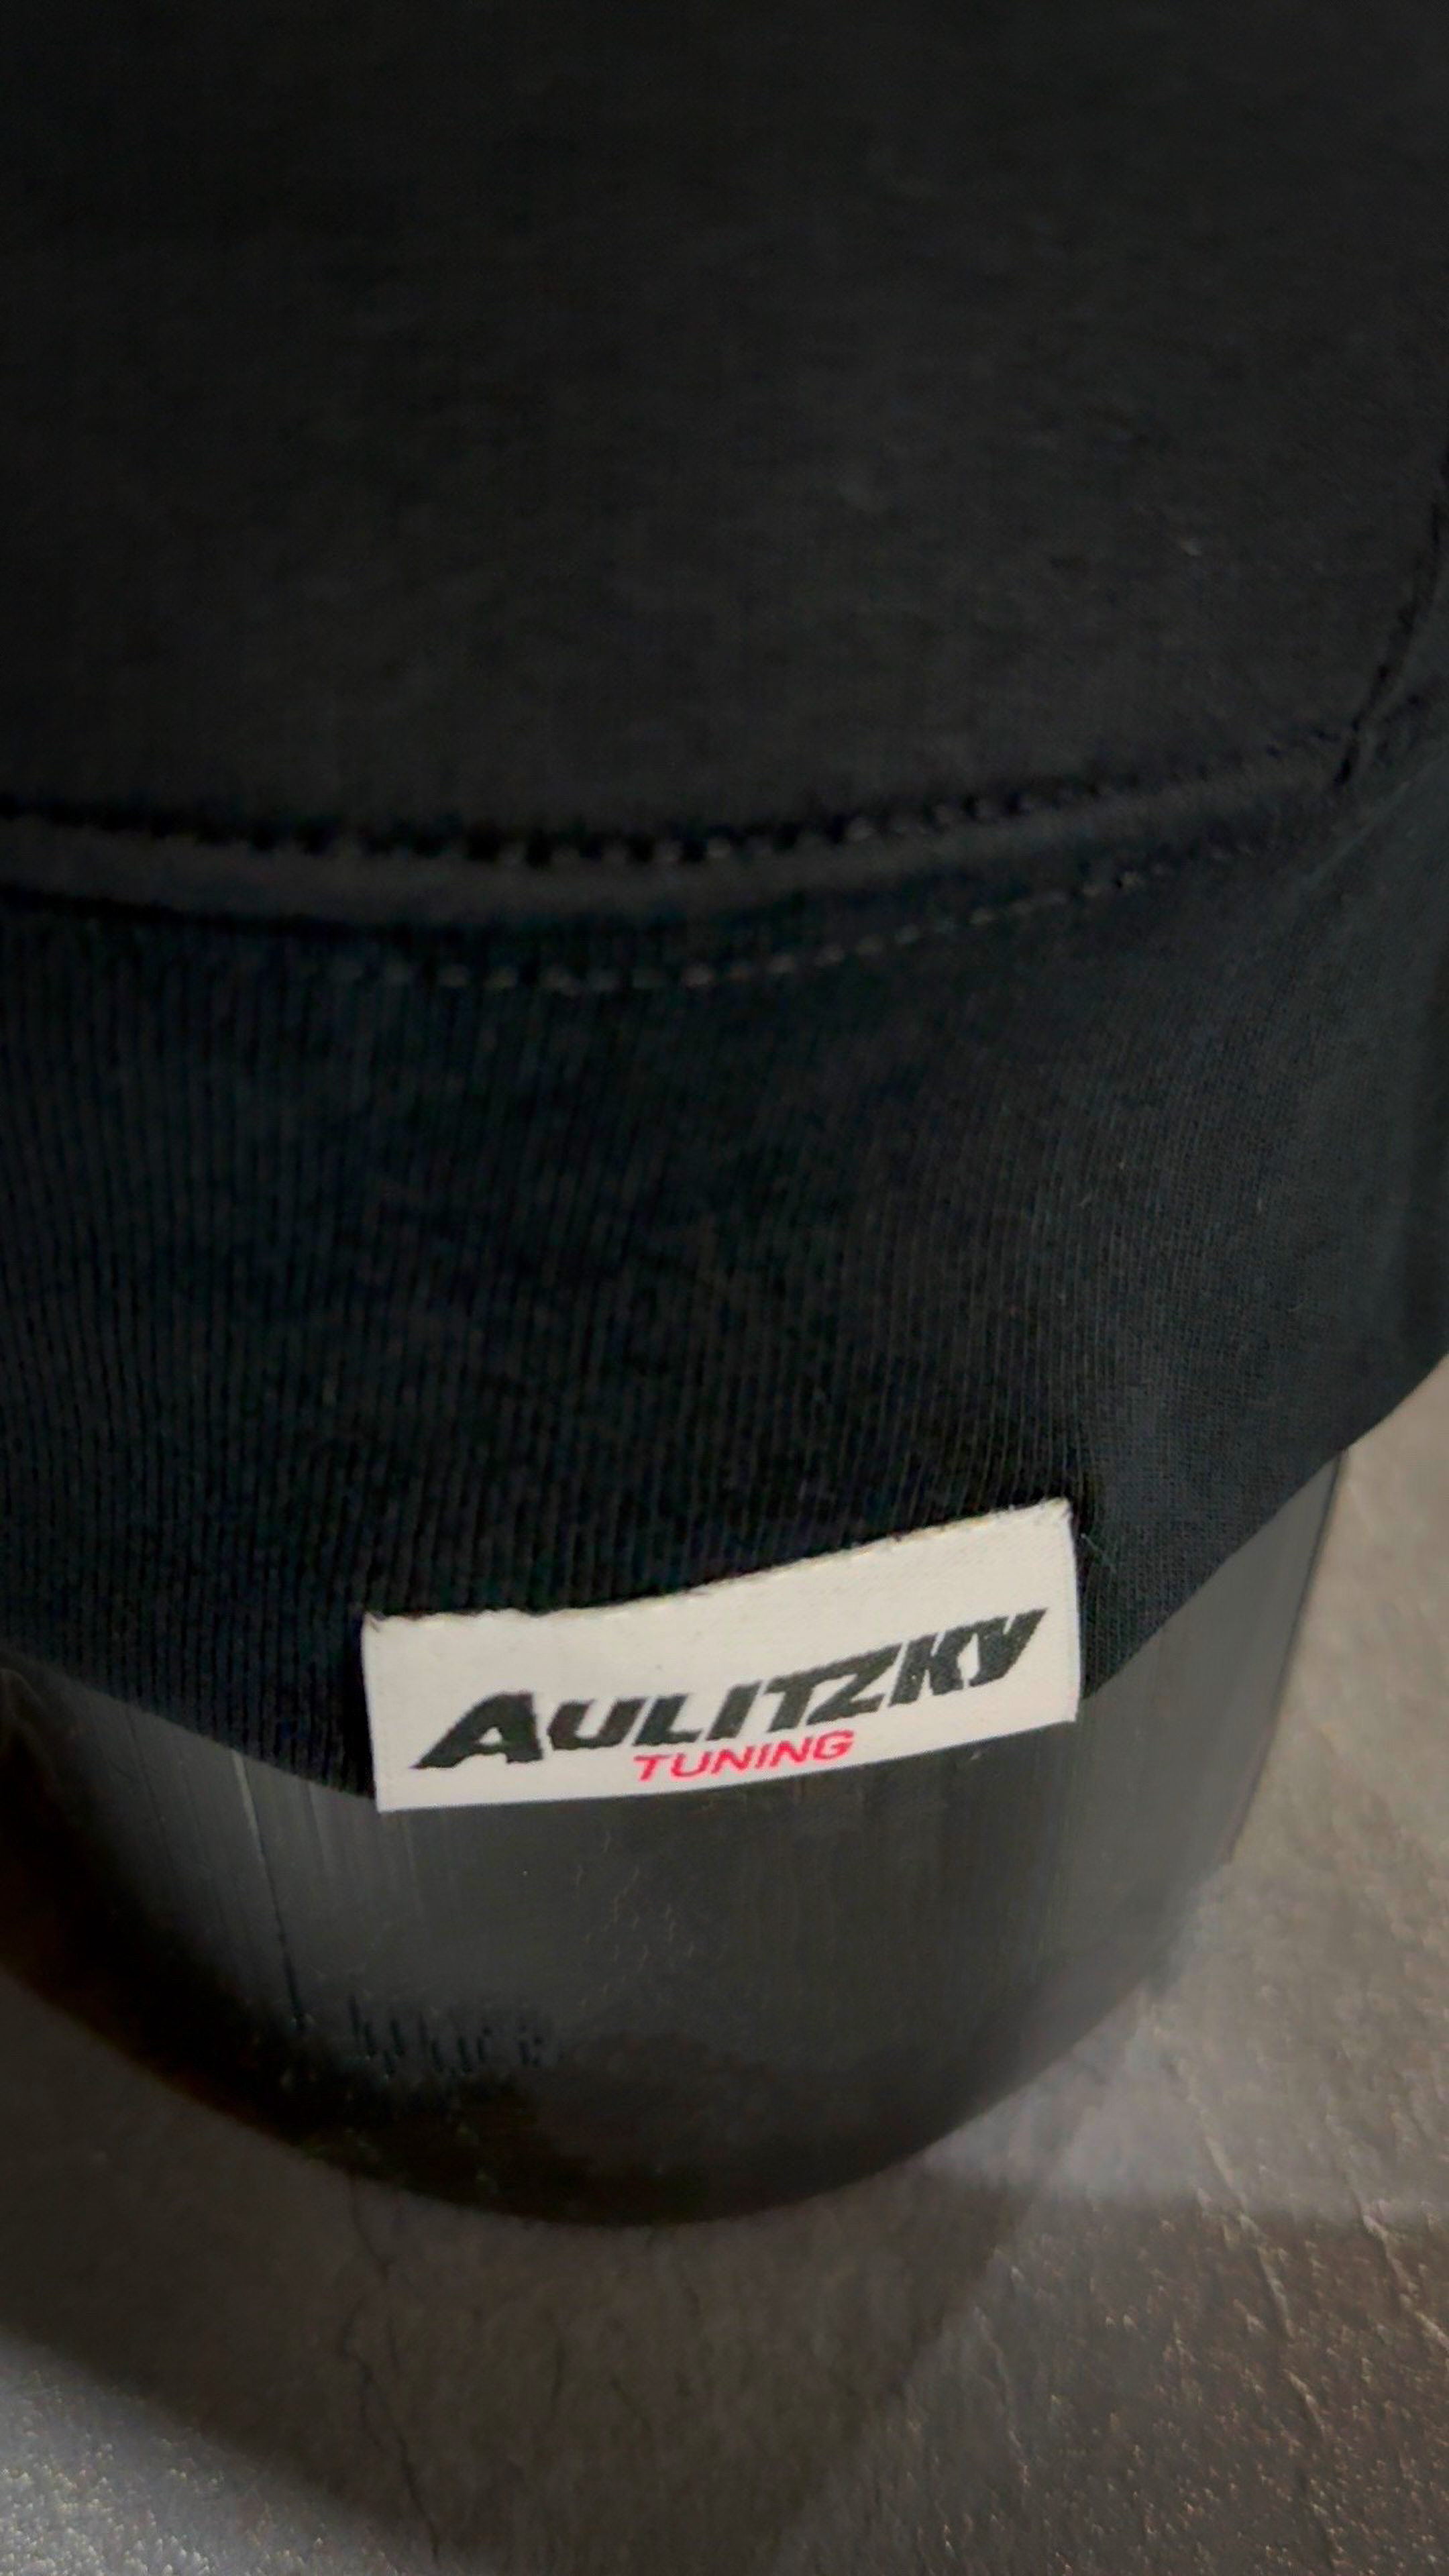 AT | Aulitzky Tuning | Hoodie | black glitch